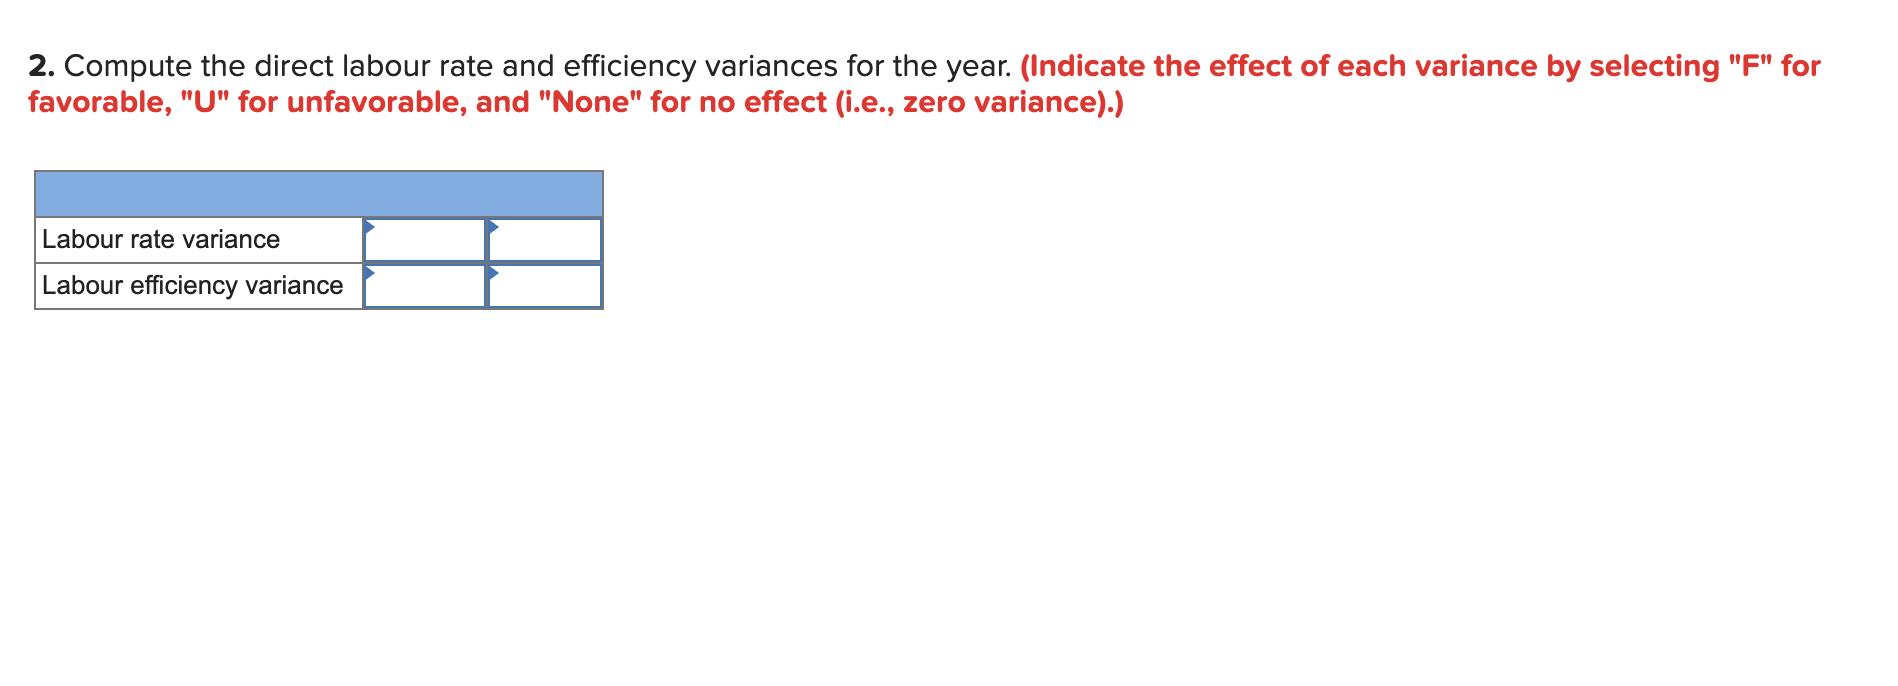 2. Compute the direct labour rate and efficiency variances for the year. (Indicate the effect of each variance by selecting